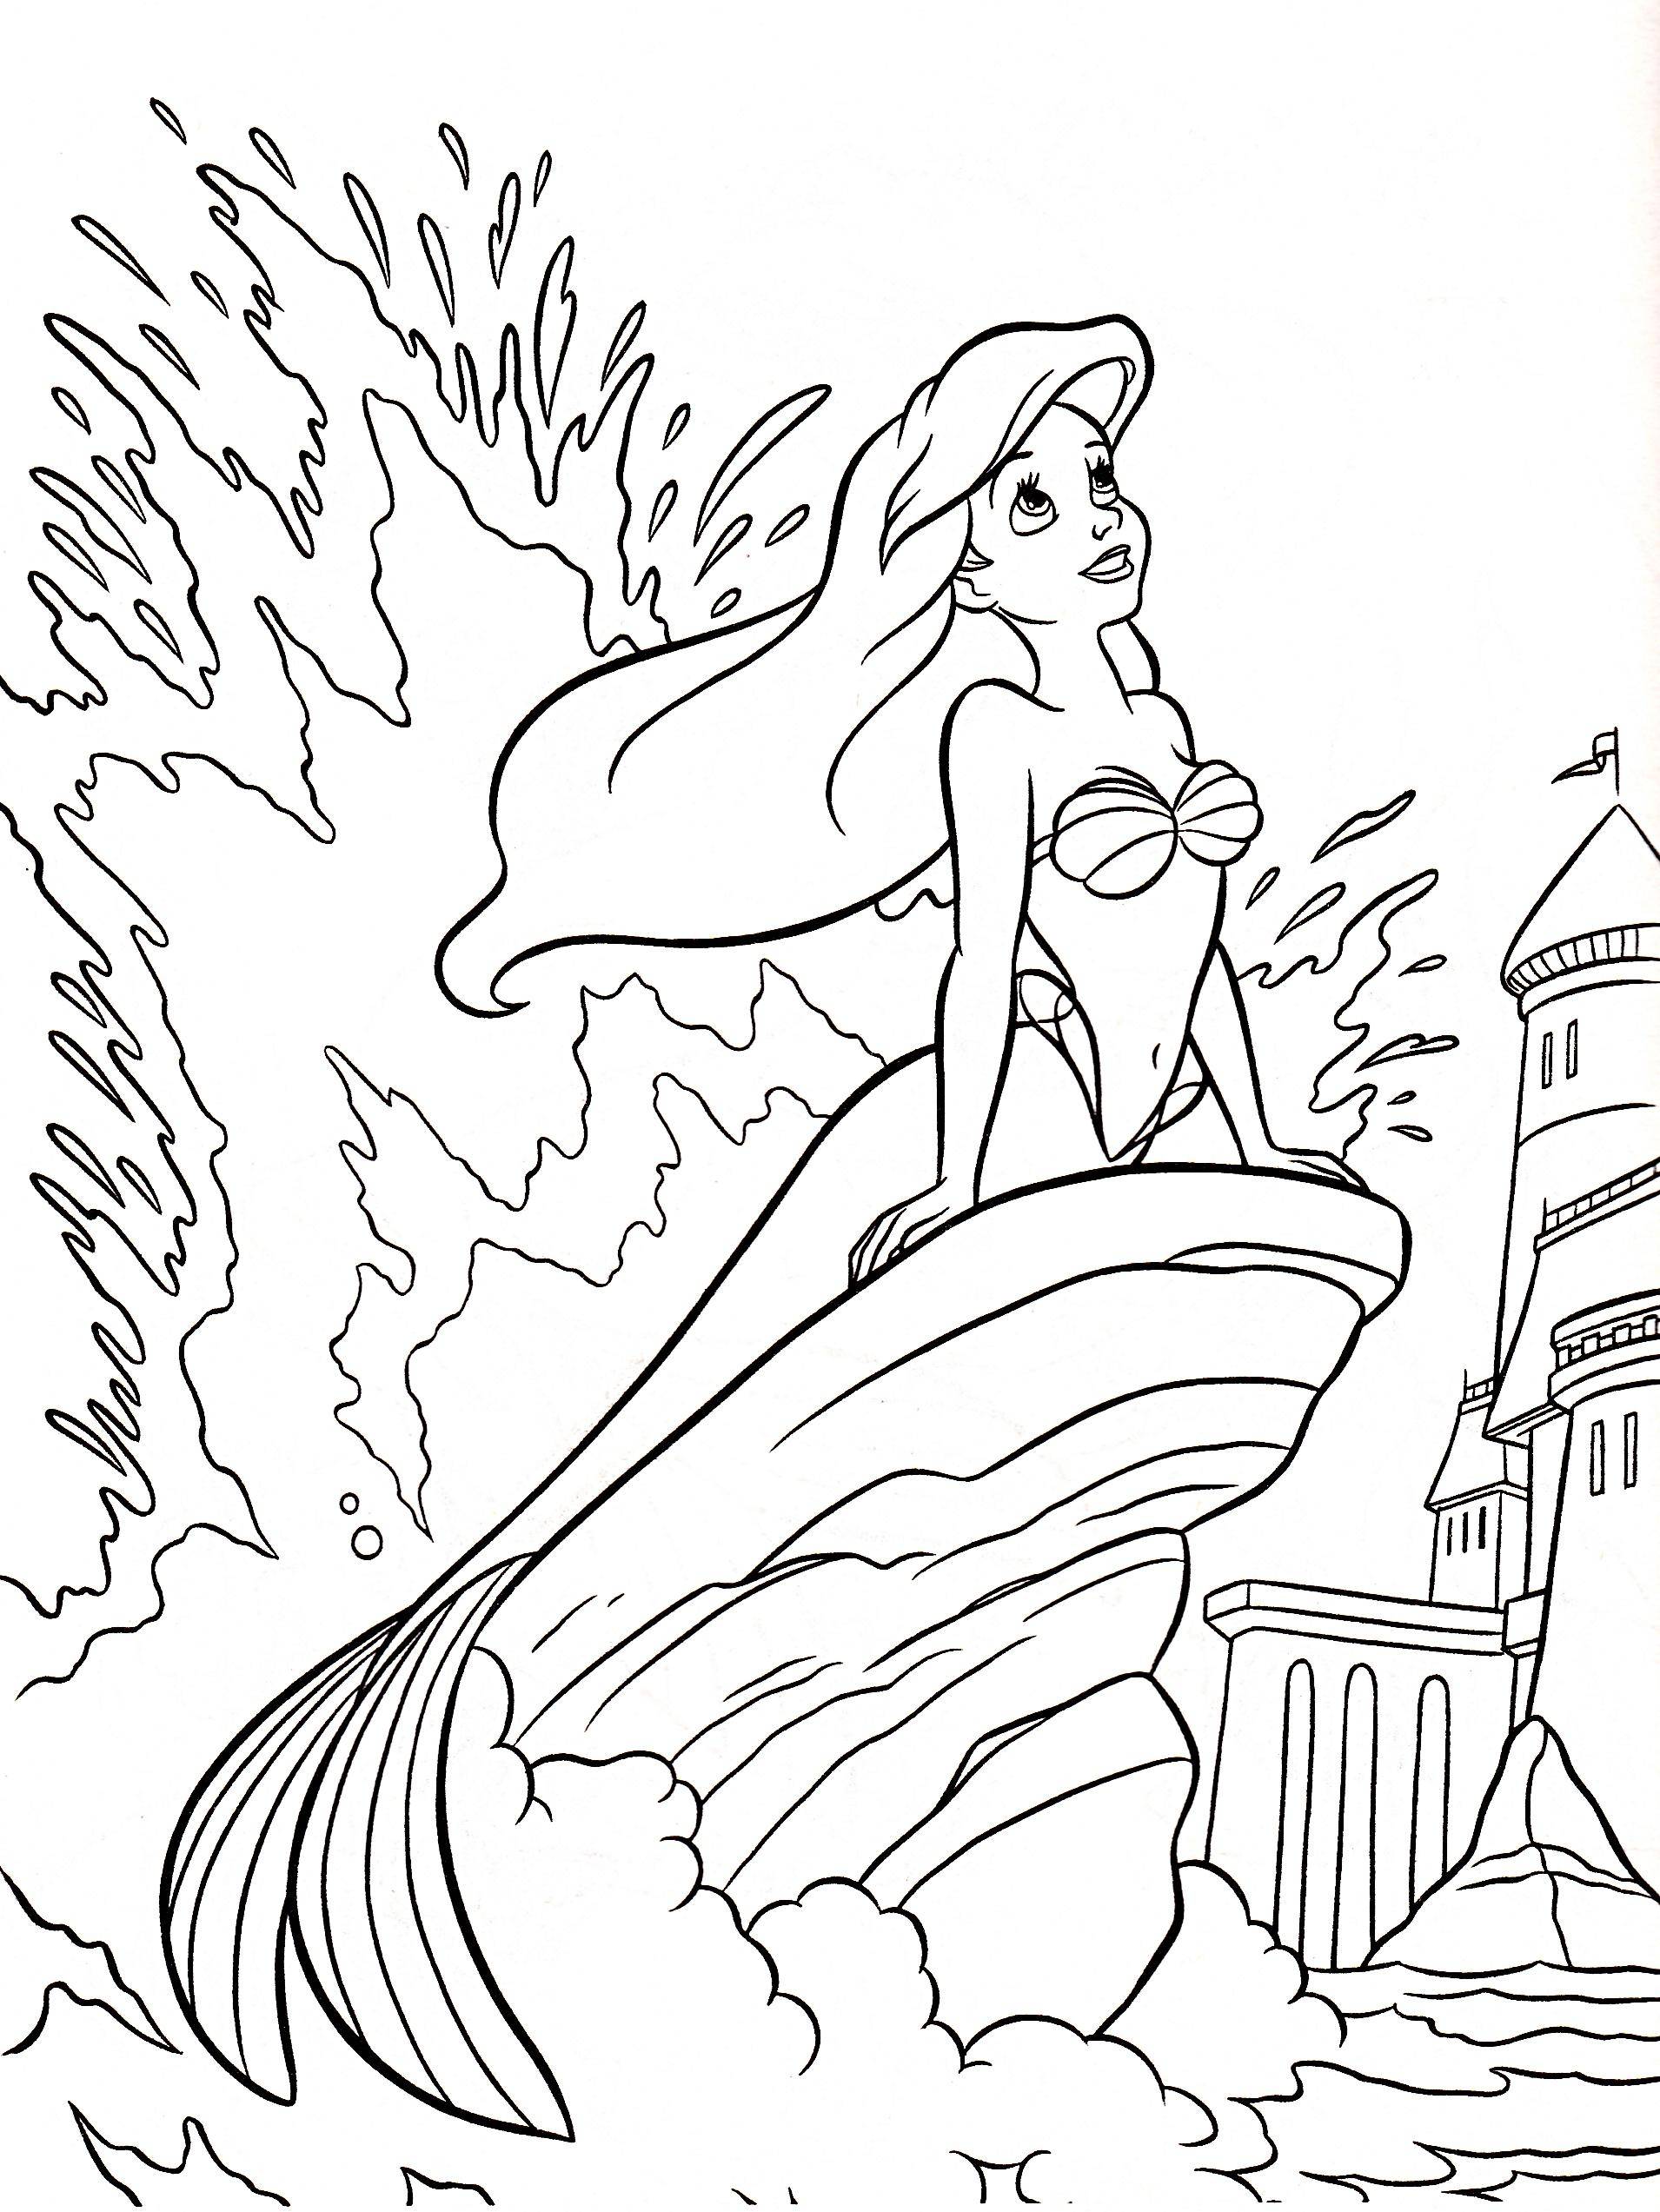 Coloring Ariel and waves. Category Disney coloring pages. Tags:  Ariel, stone, mermaid.